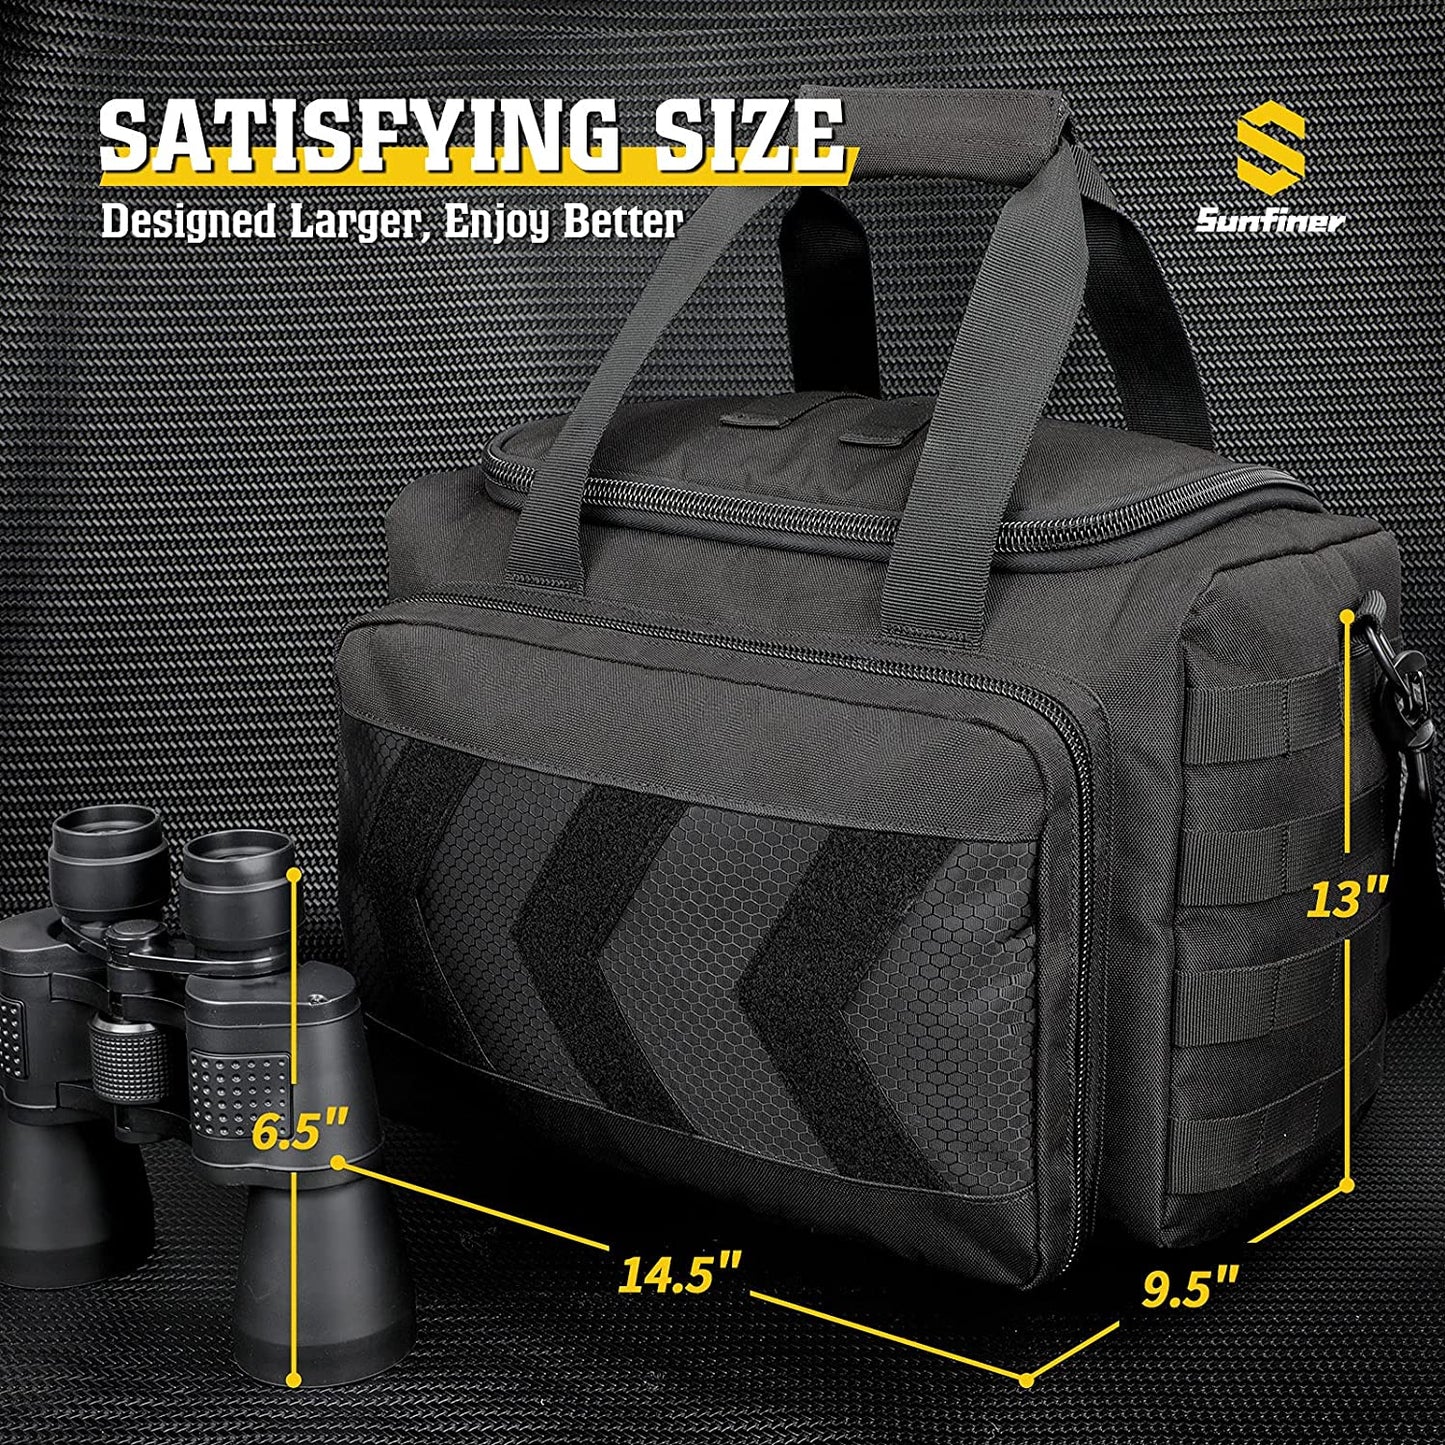 Sunfiner Multi-Function Tactical Range Bag with Magazine Gear